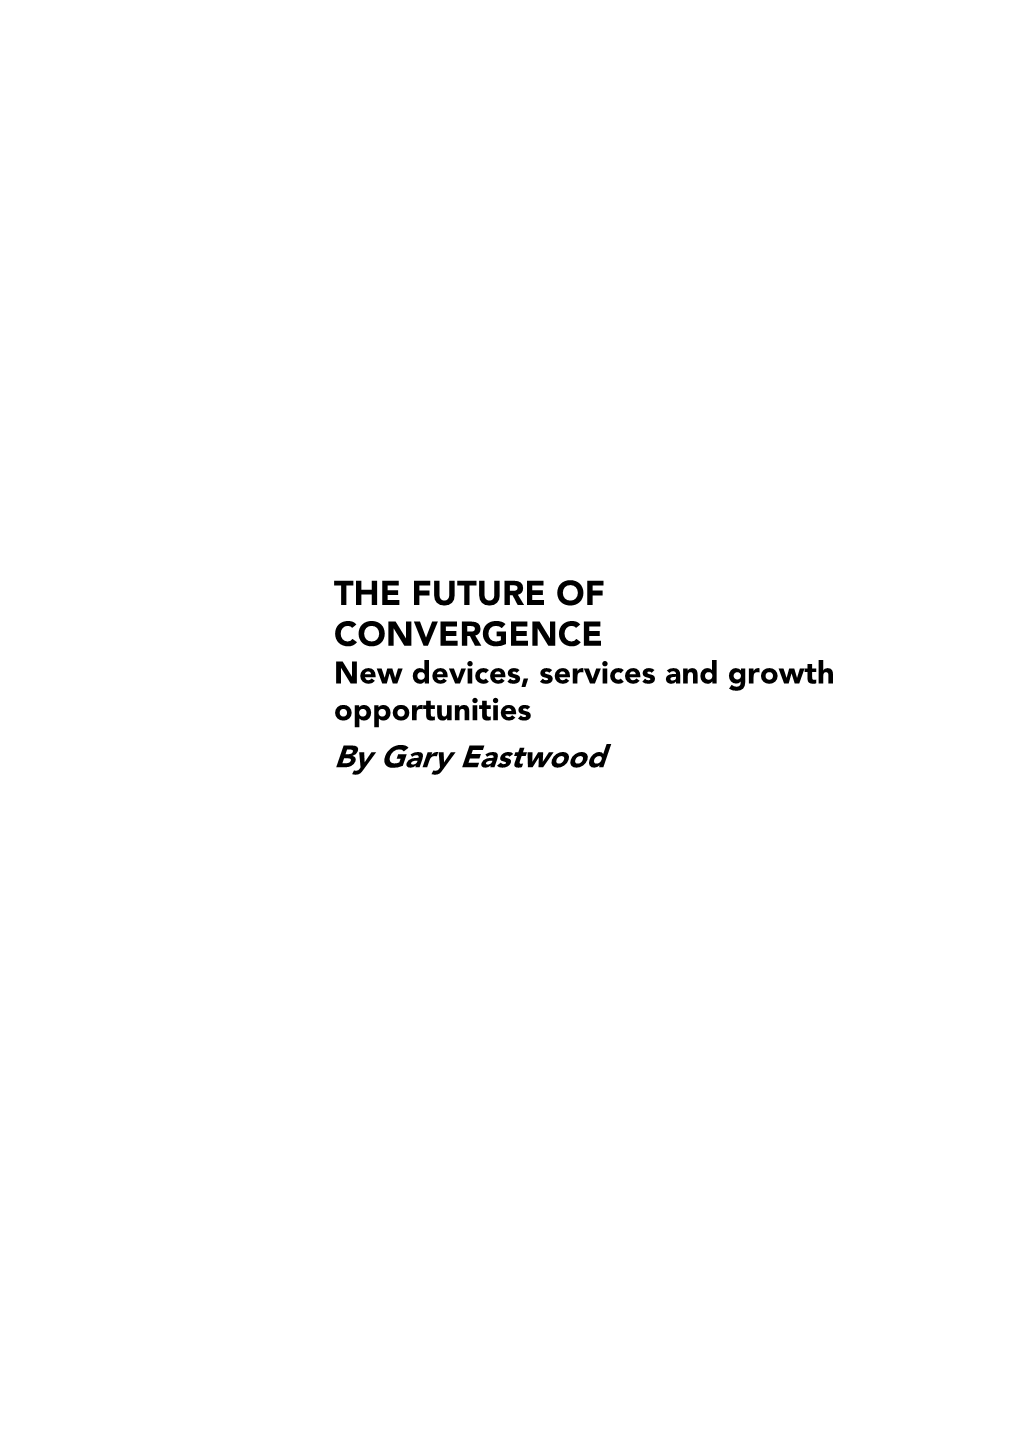 THE FUTURE of CONVERGENCE New Devices, Services and Growth Opportunities by Gary Eastwood